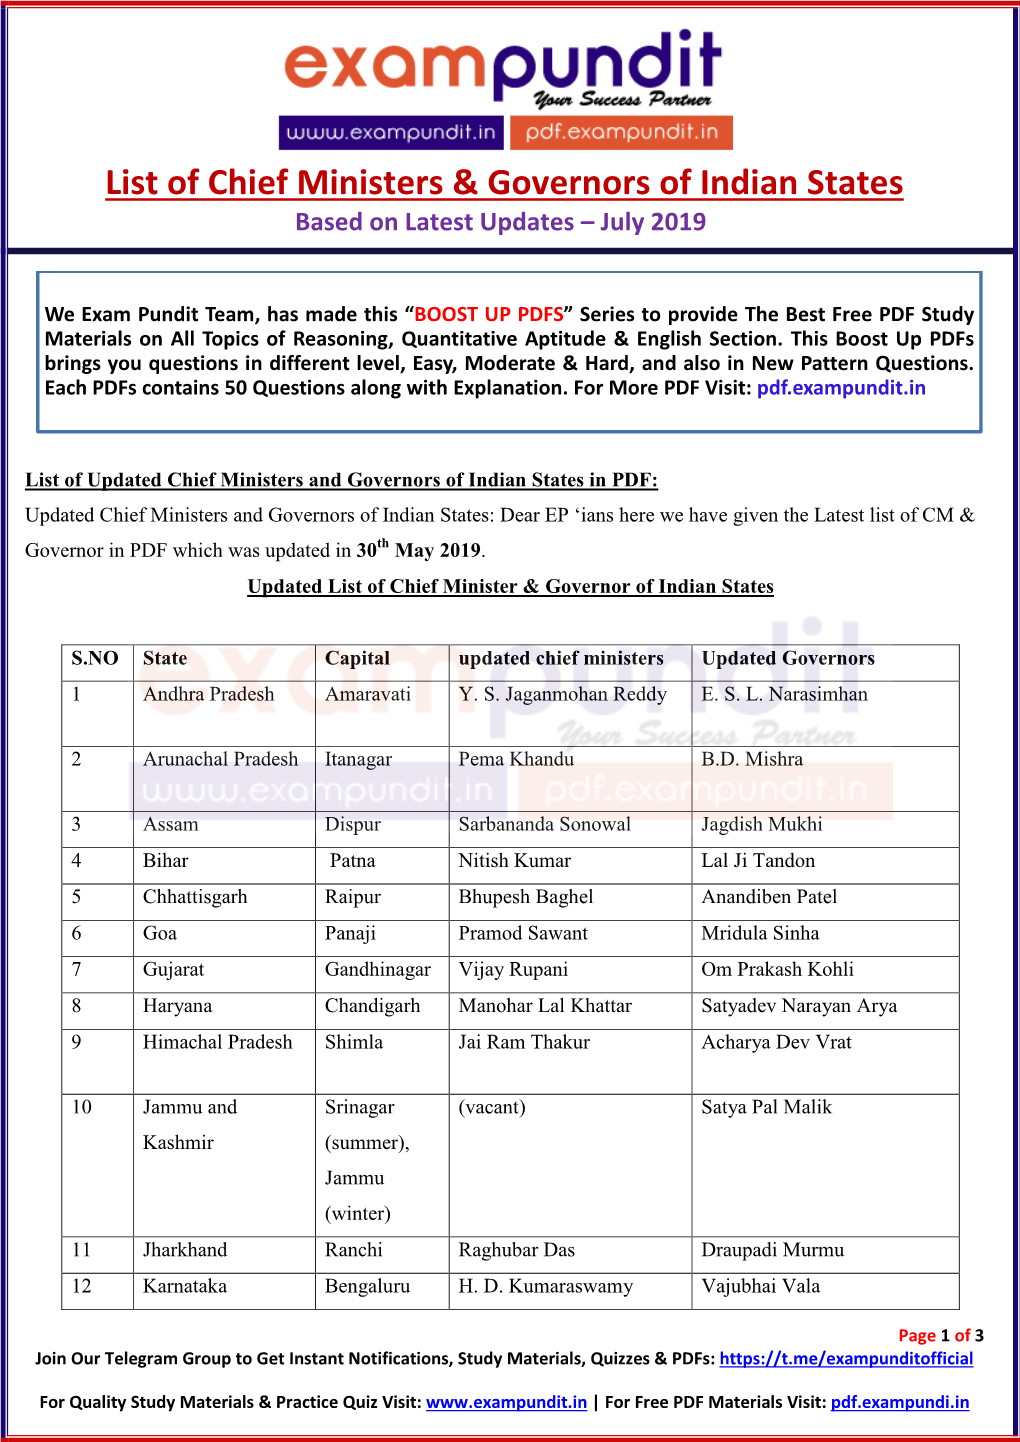 List of Chief Ministers & Governors of Indian States